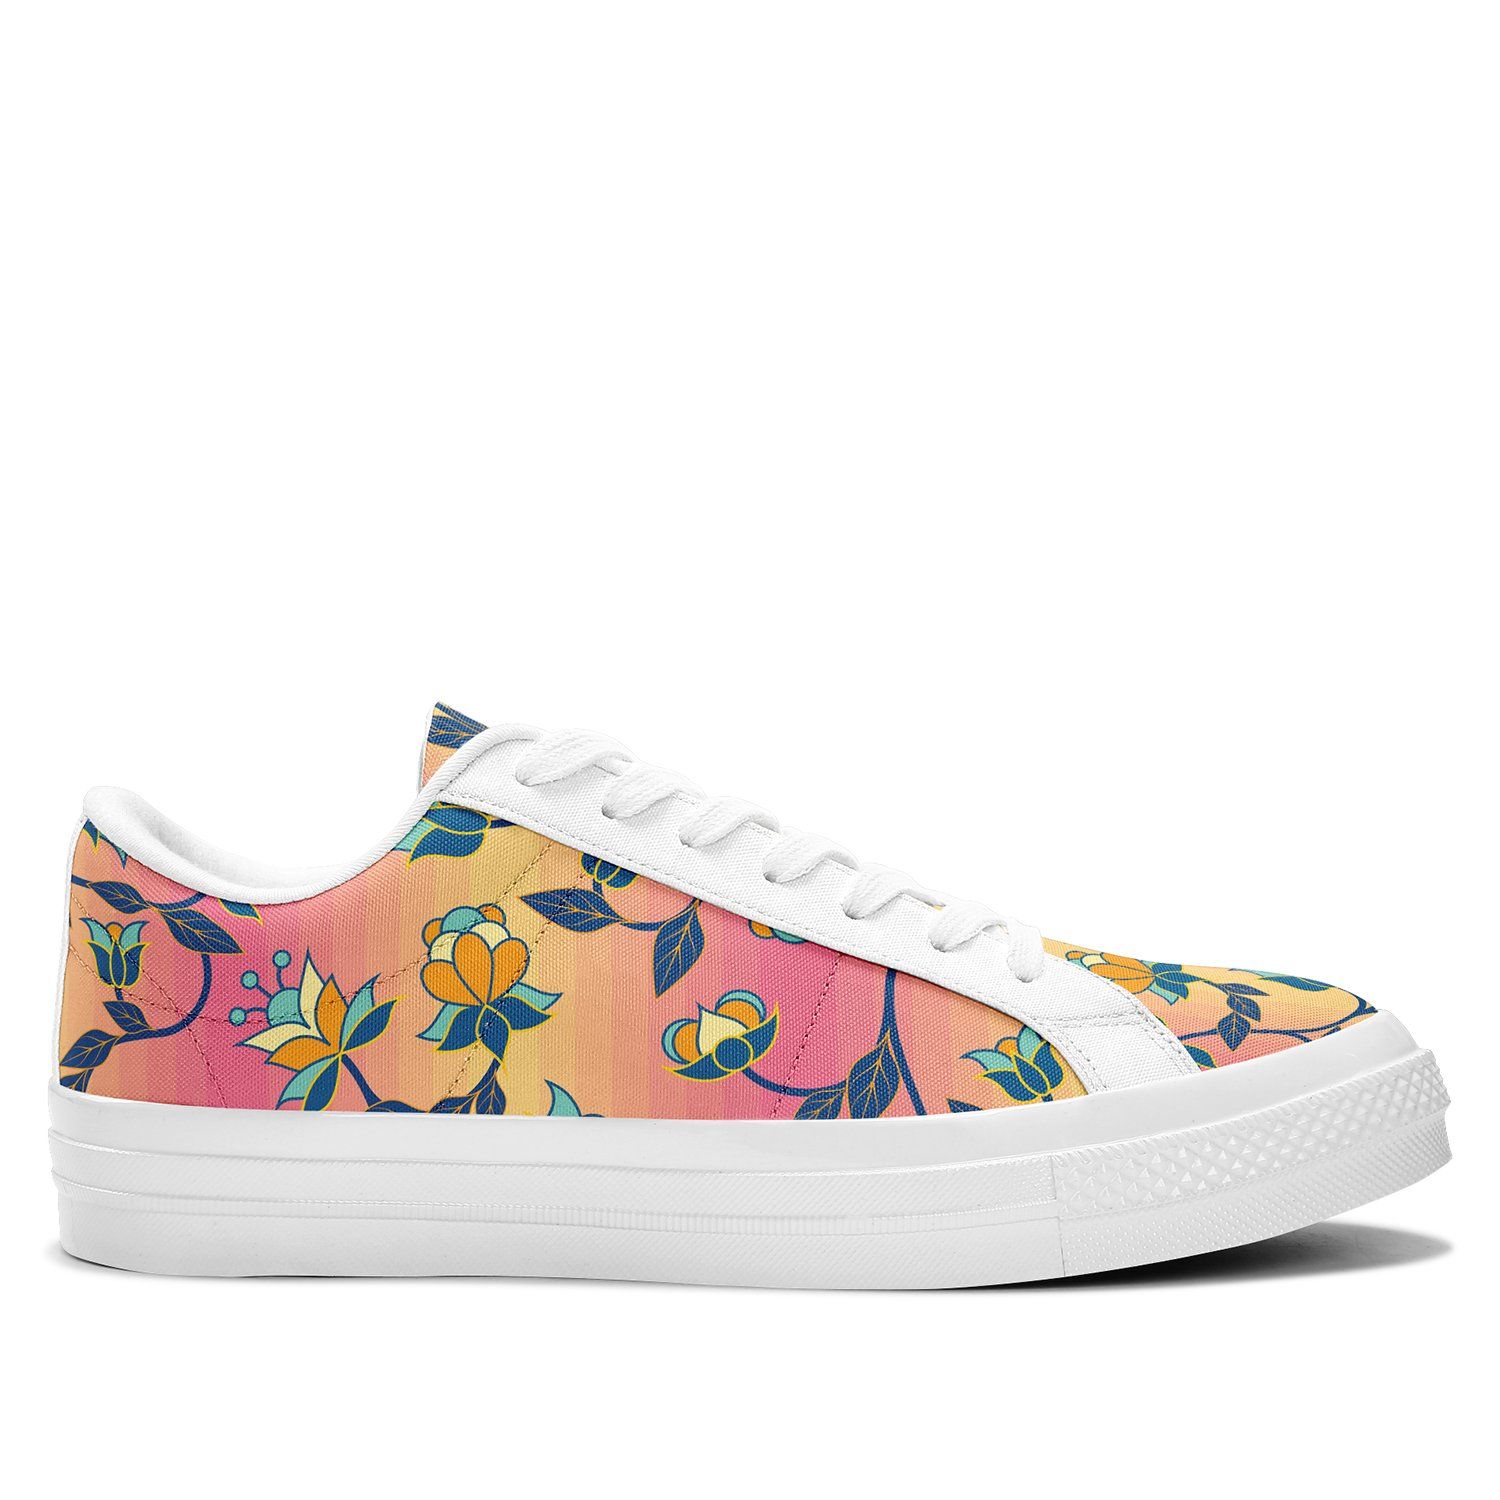 Orange Days Aapisi Low Top Canvas Shoes White Sole aapisi Herman 